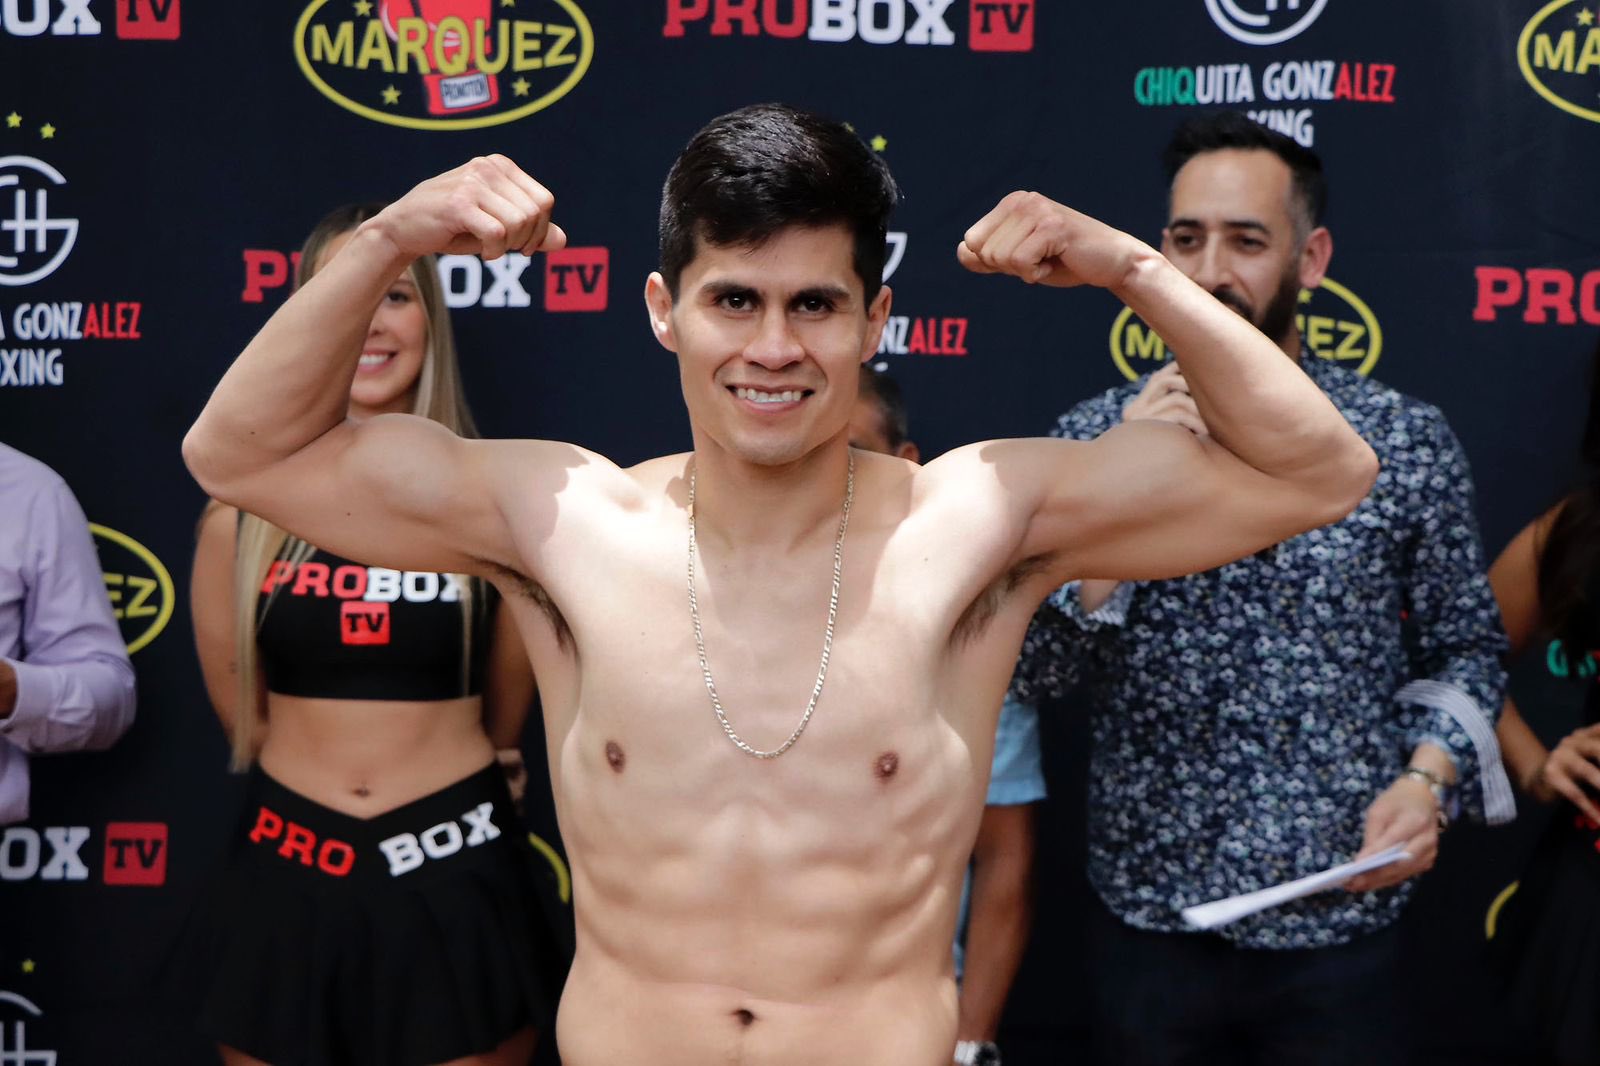 Carlos Sanchez looks to put his career back on track against Alexander Duran